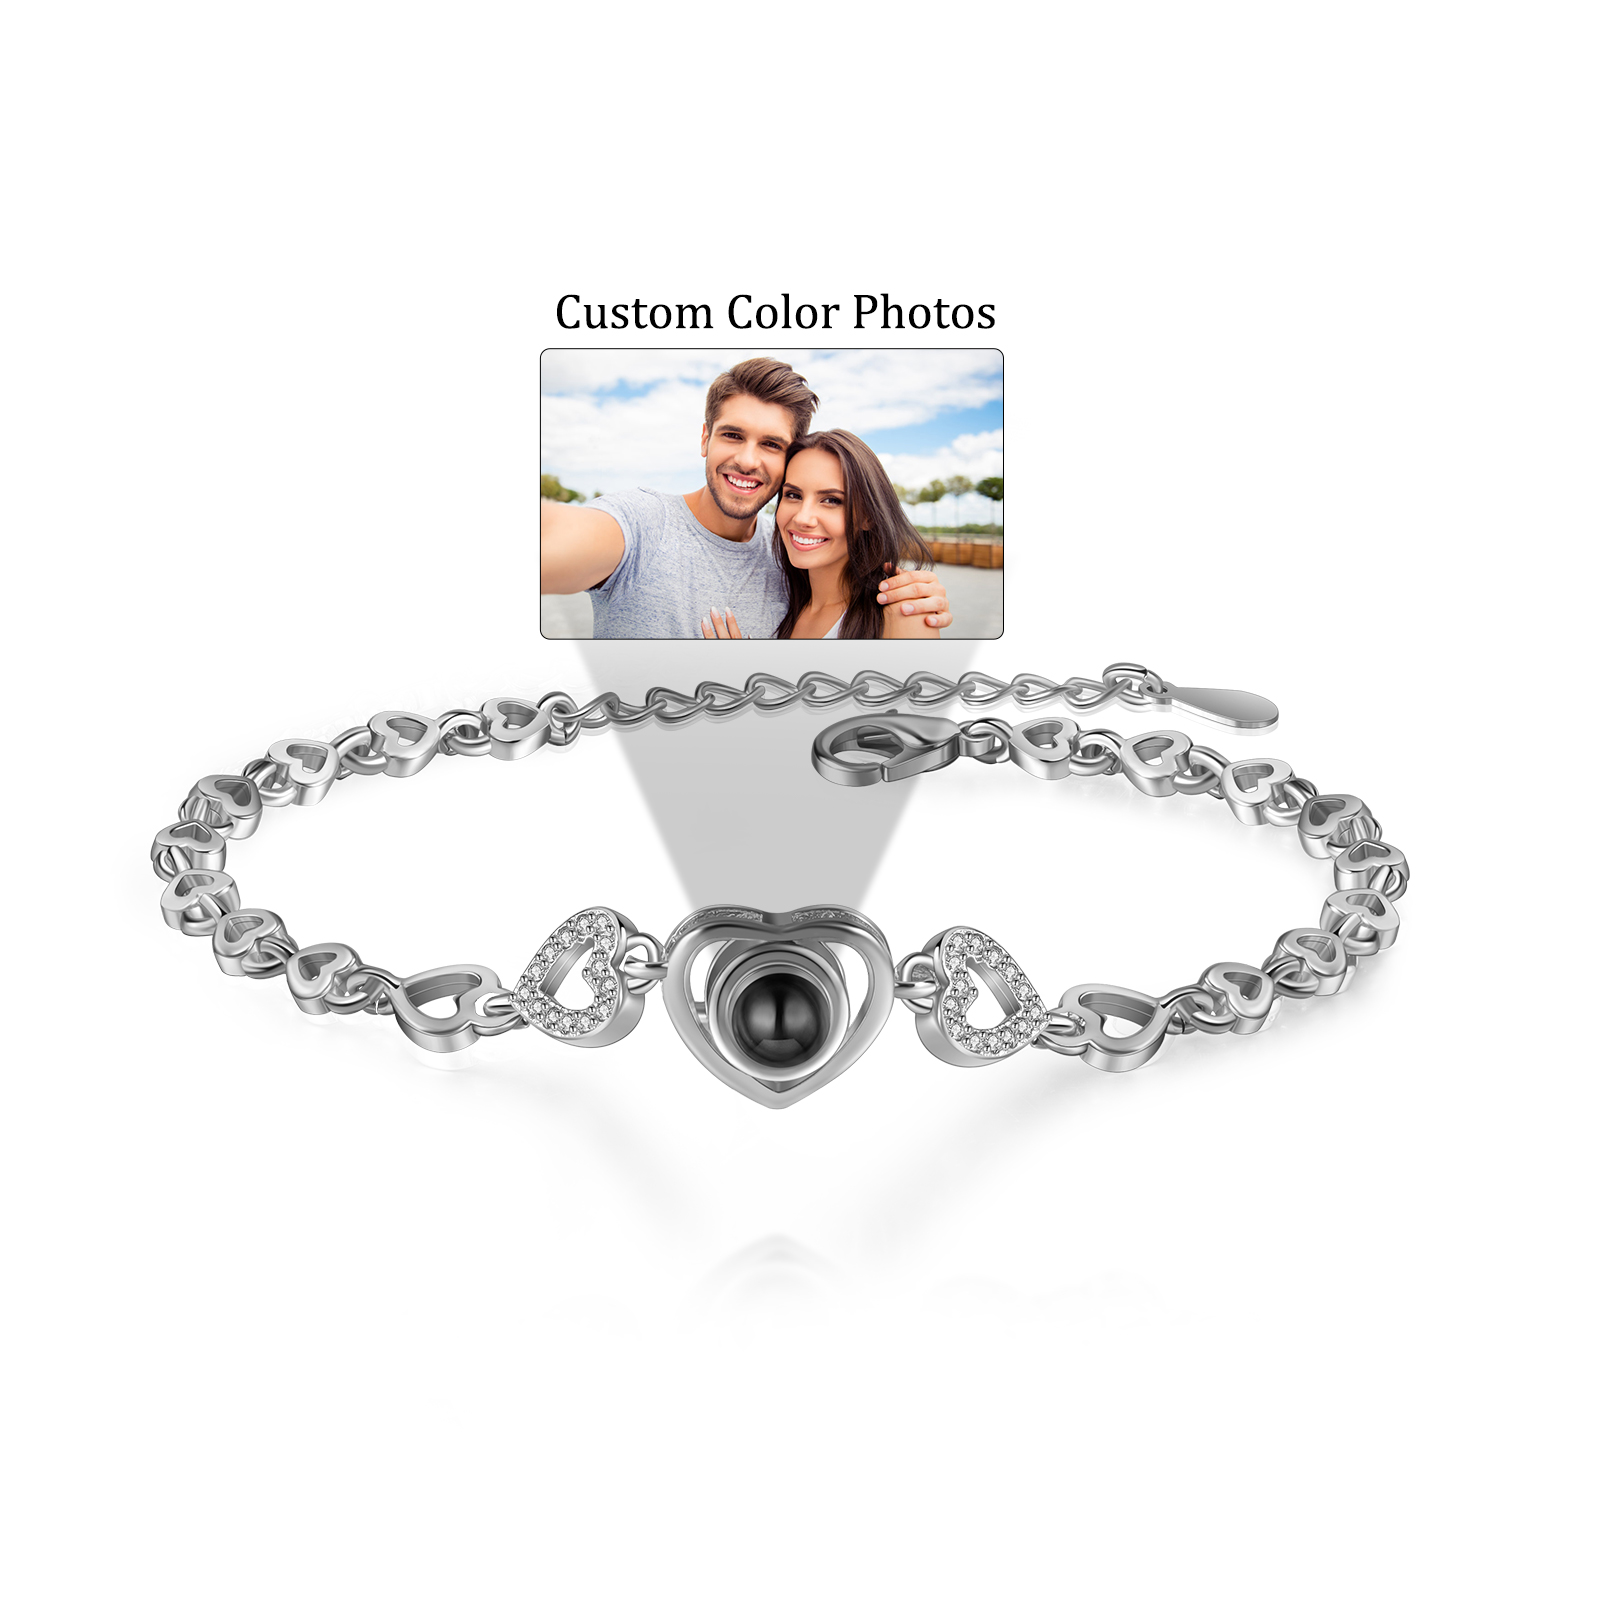 Heart Chain Projection Bracelet Personalized Photo Bracelet Creative Gift for Her Unique Mother's Day Gifts